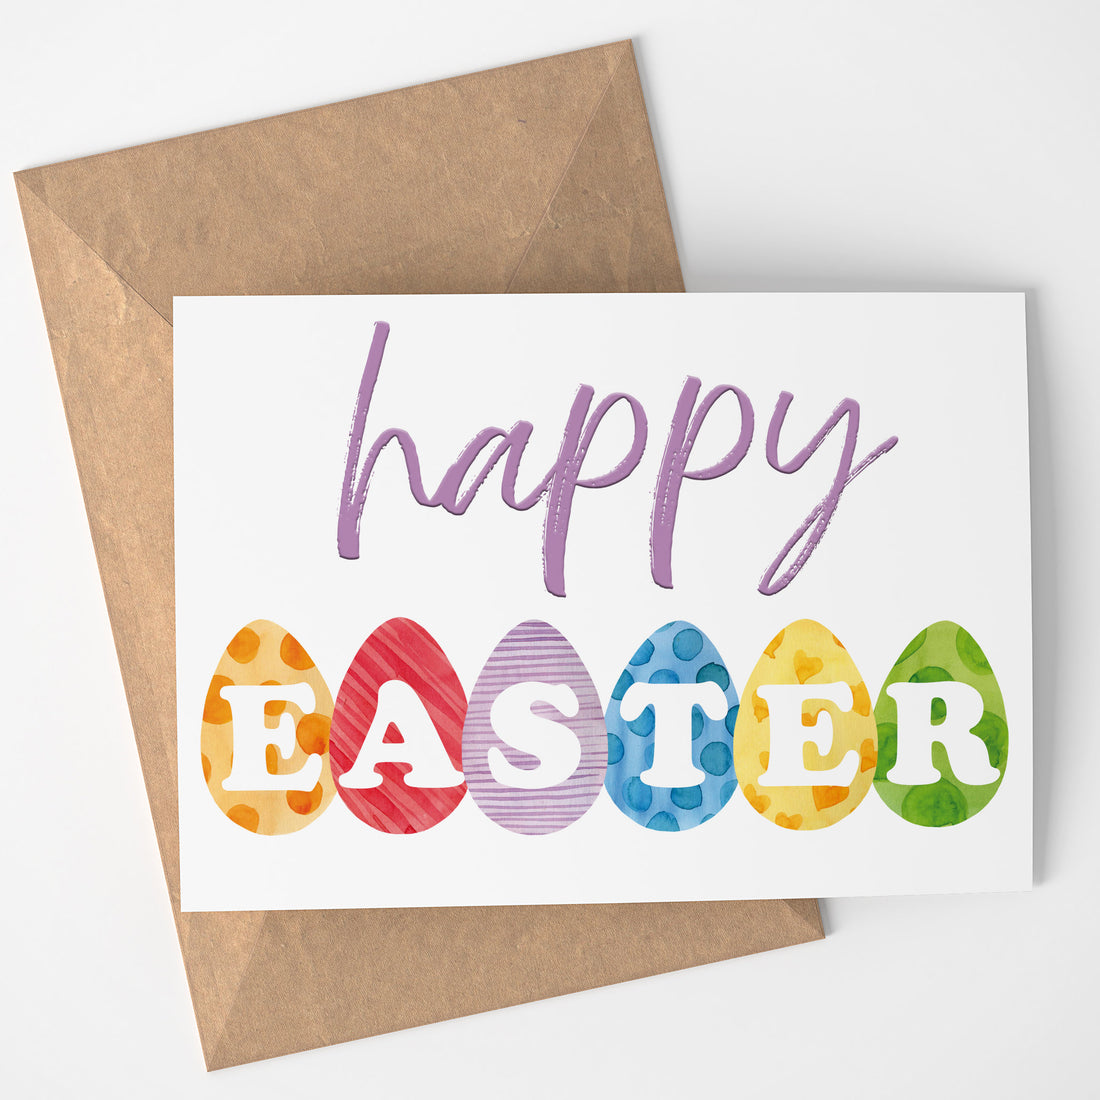 HAPPY EASTER greeting card - Printable instant download Easter eggs card